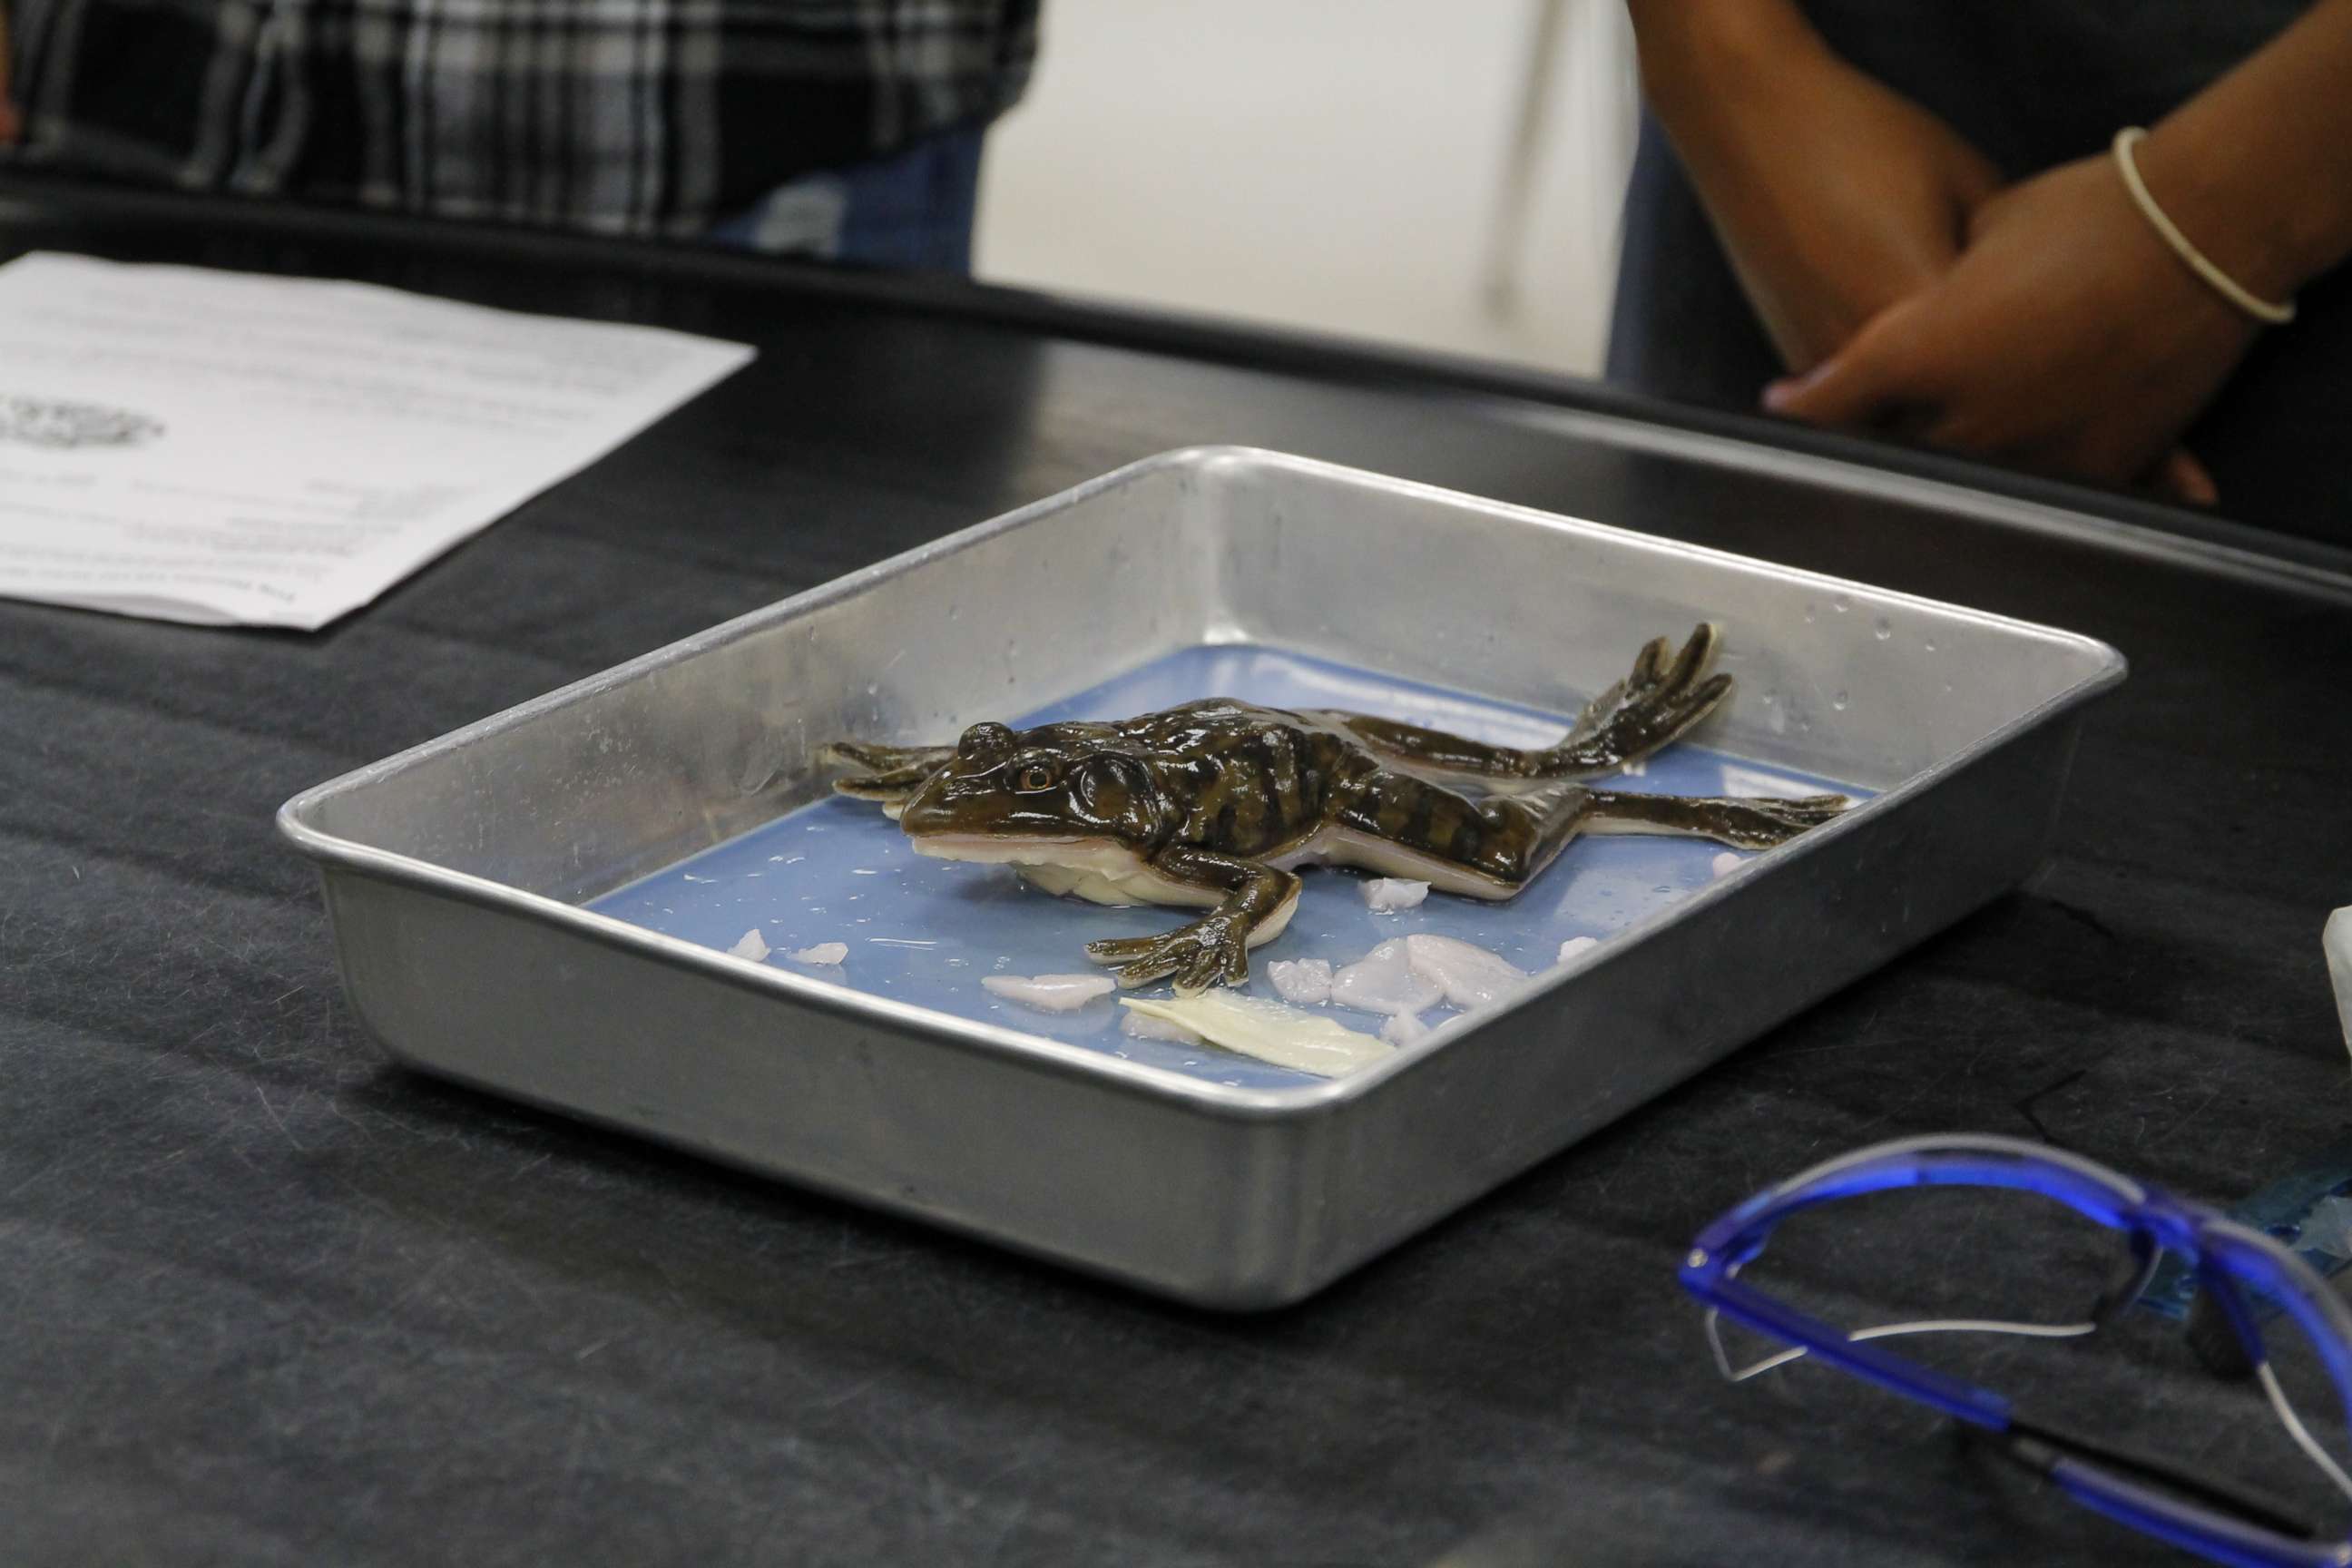 PHOTO: A SynDaver Synthetic Frog is displayed on a tray at J.W. Mitchell High School in New Port Richey, Fla., on Nov. 20, 2019.